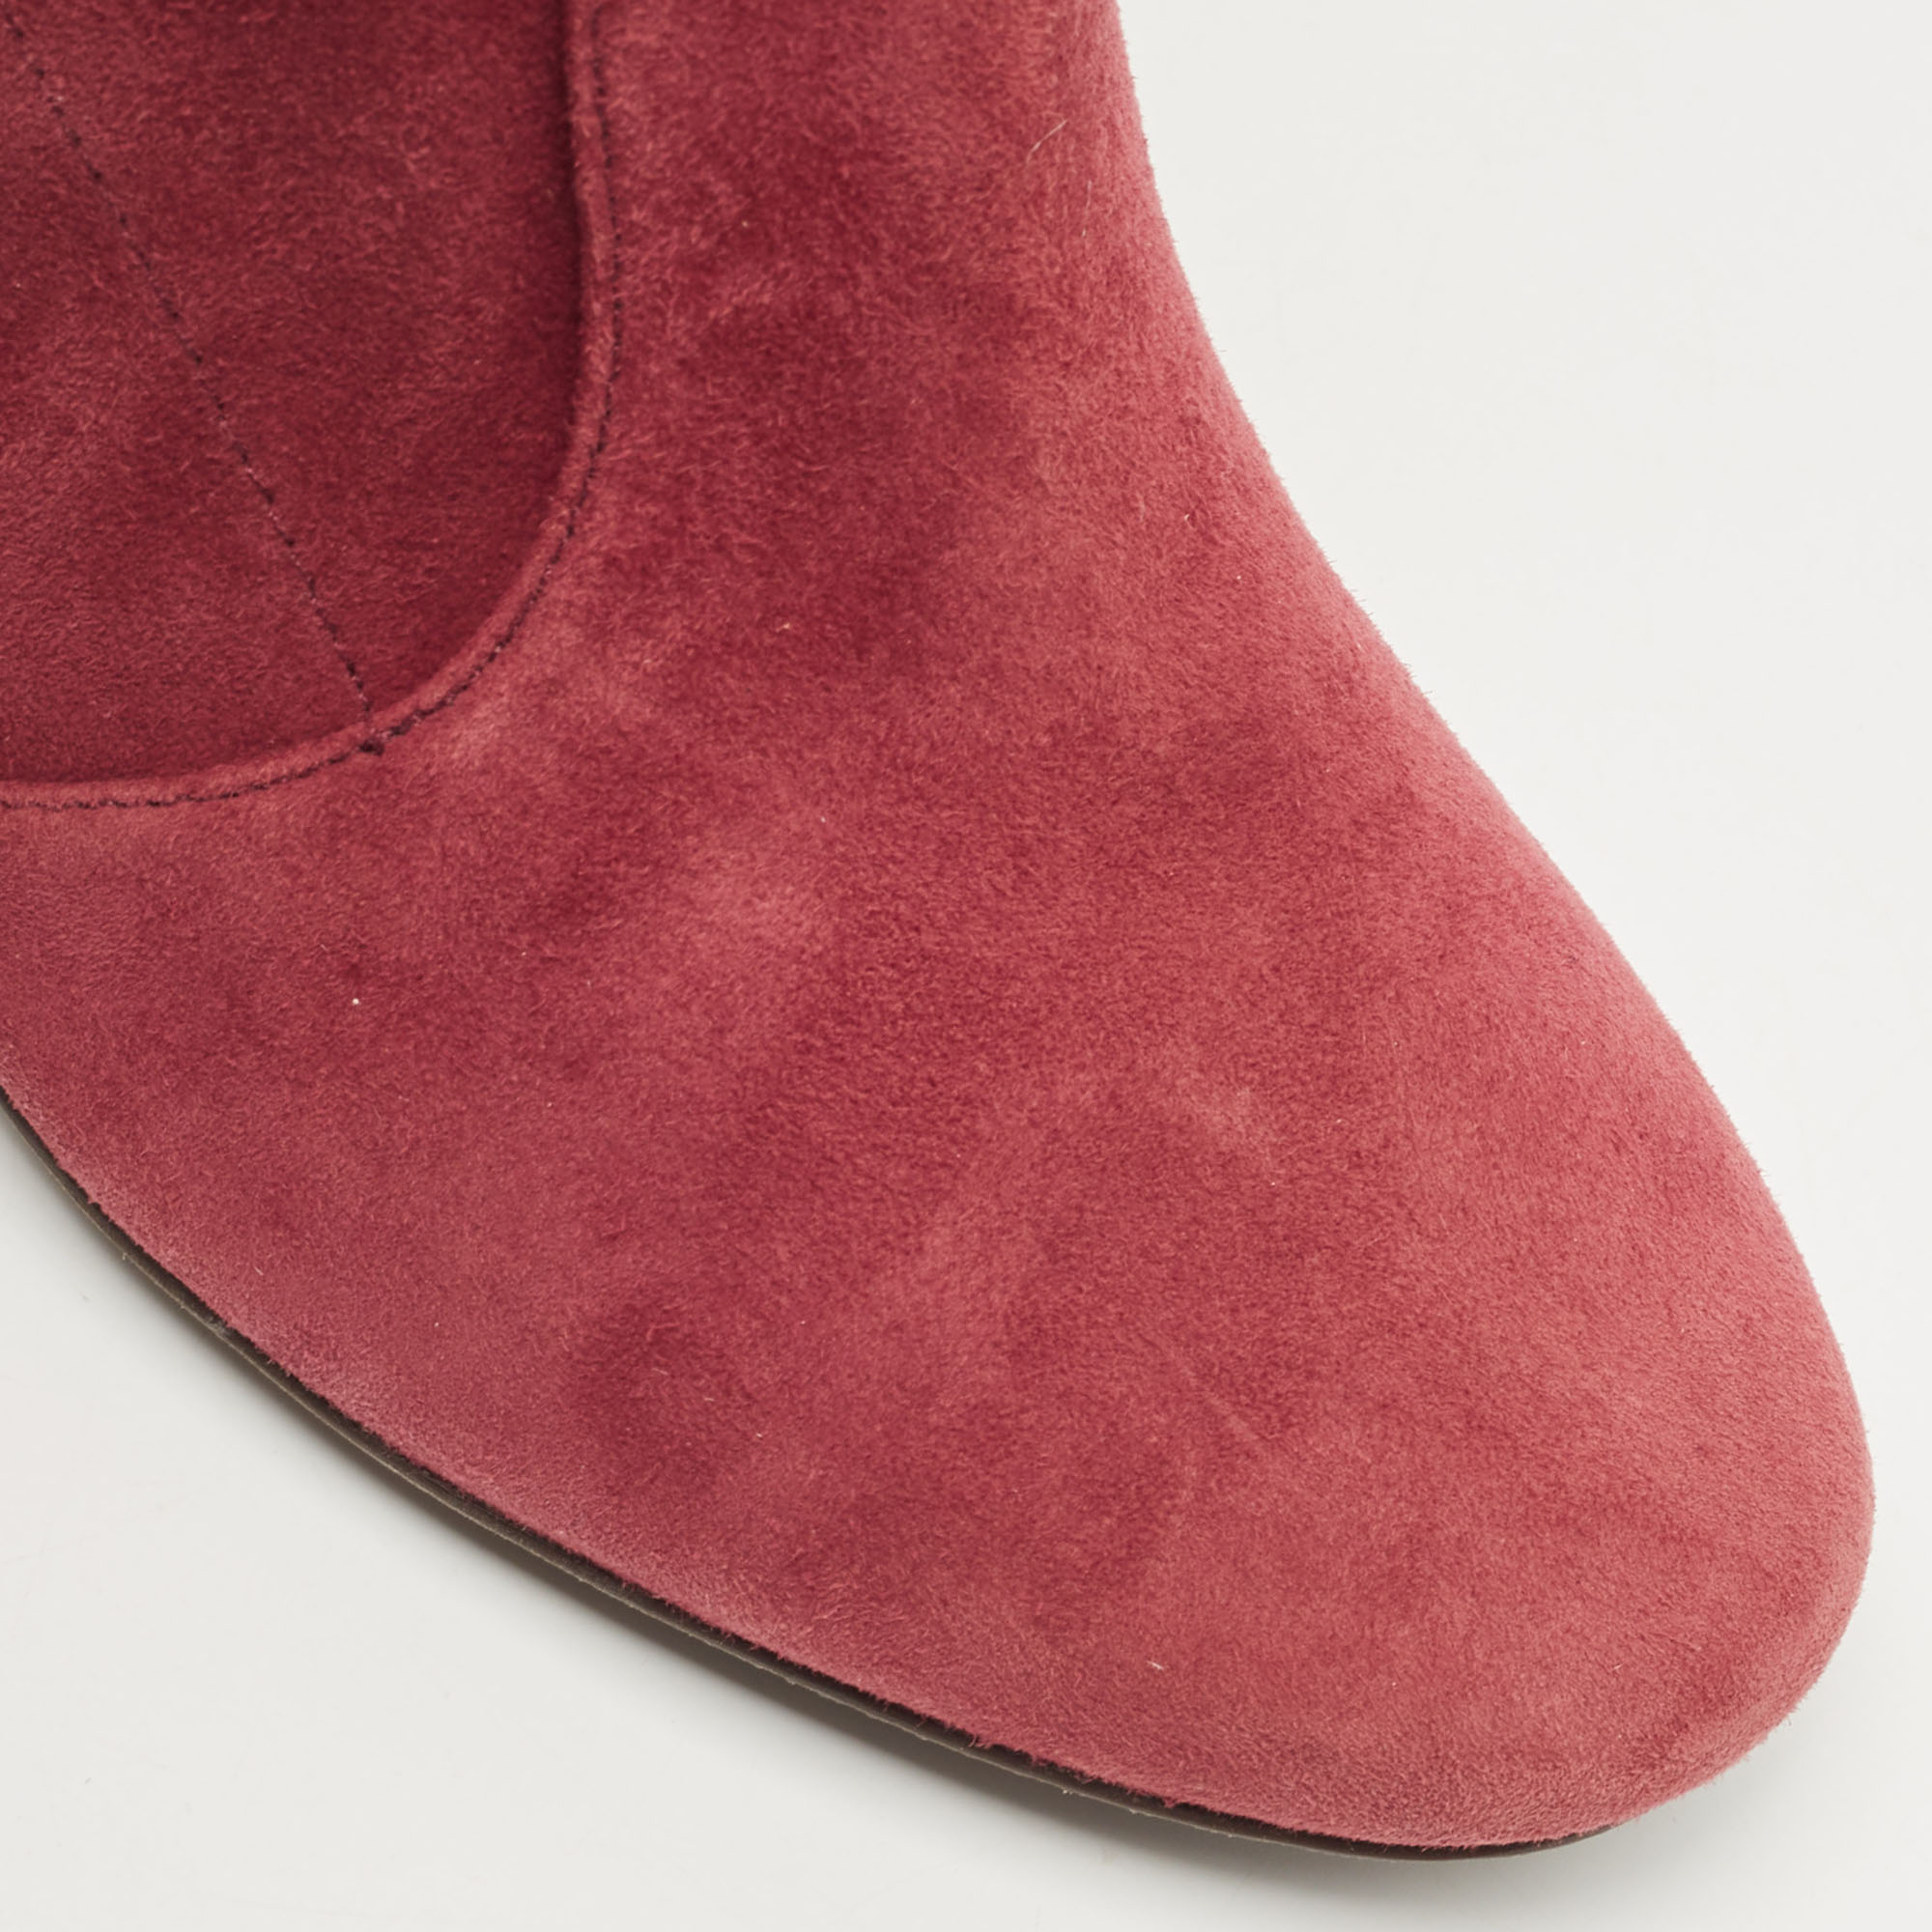 Tory Burch Burgundy Suede Ankle Boots Size 37